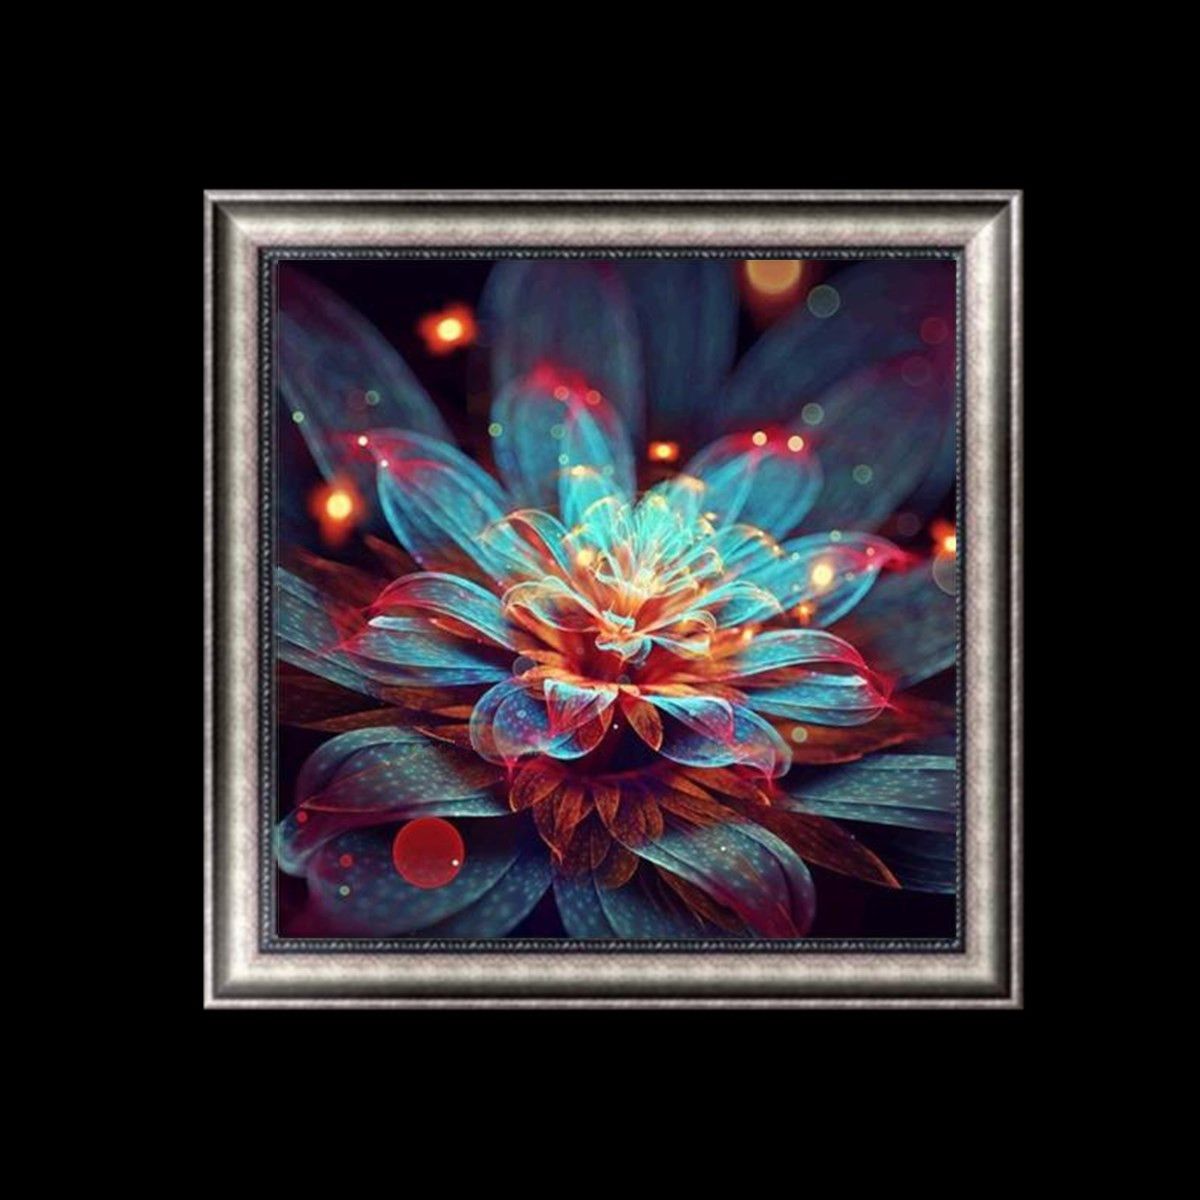 Full-5D-Diamond-Paintings-Tool-Abstract-Flower-Craft-Stitch-Tools-Home-Wall-Decorations-1605765